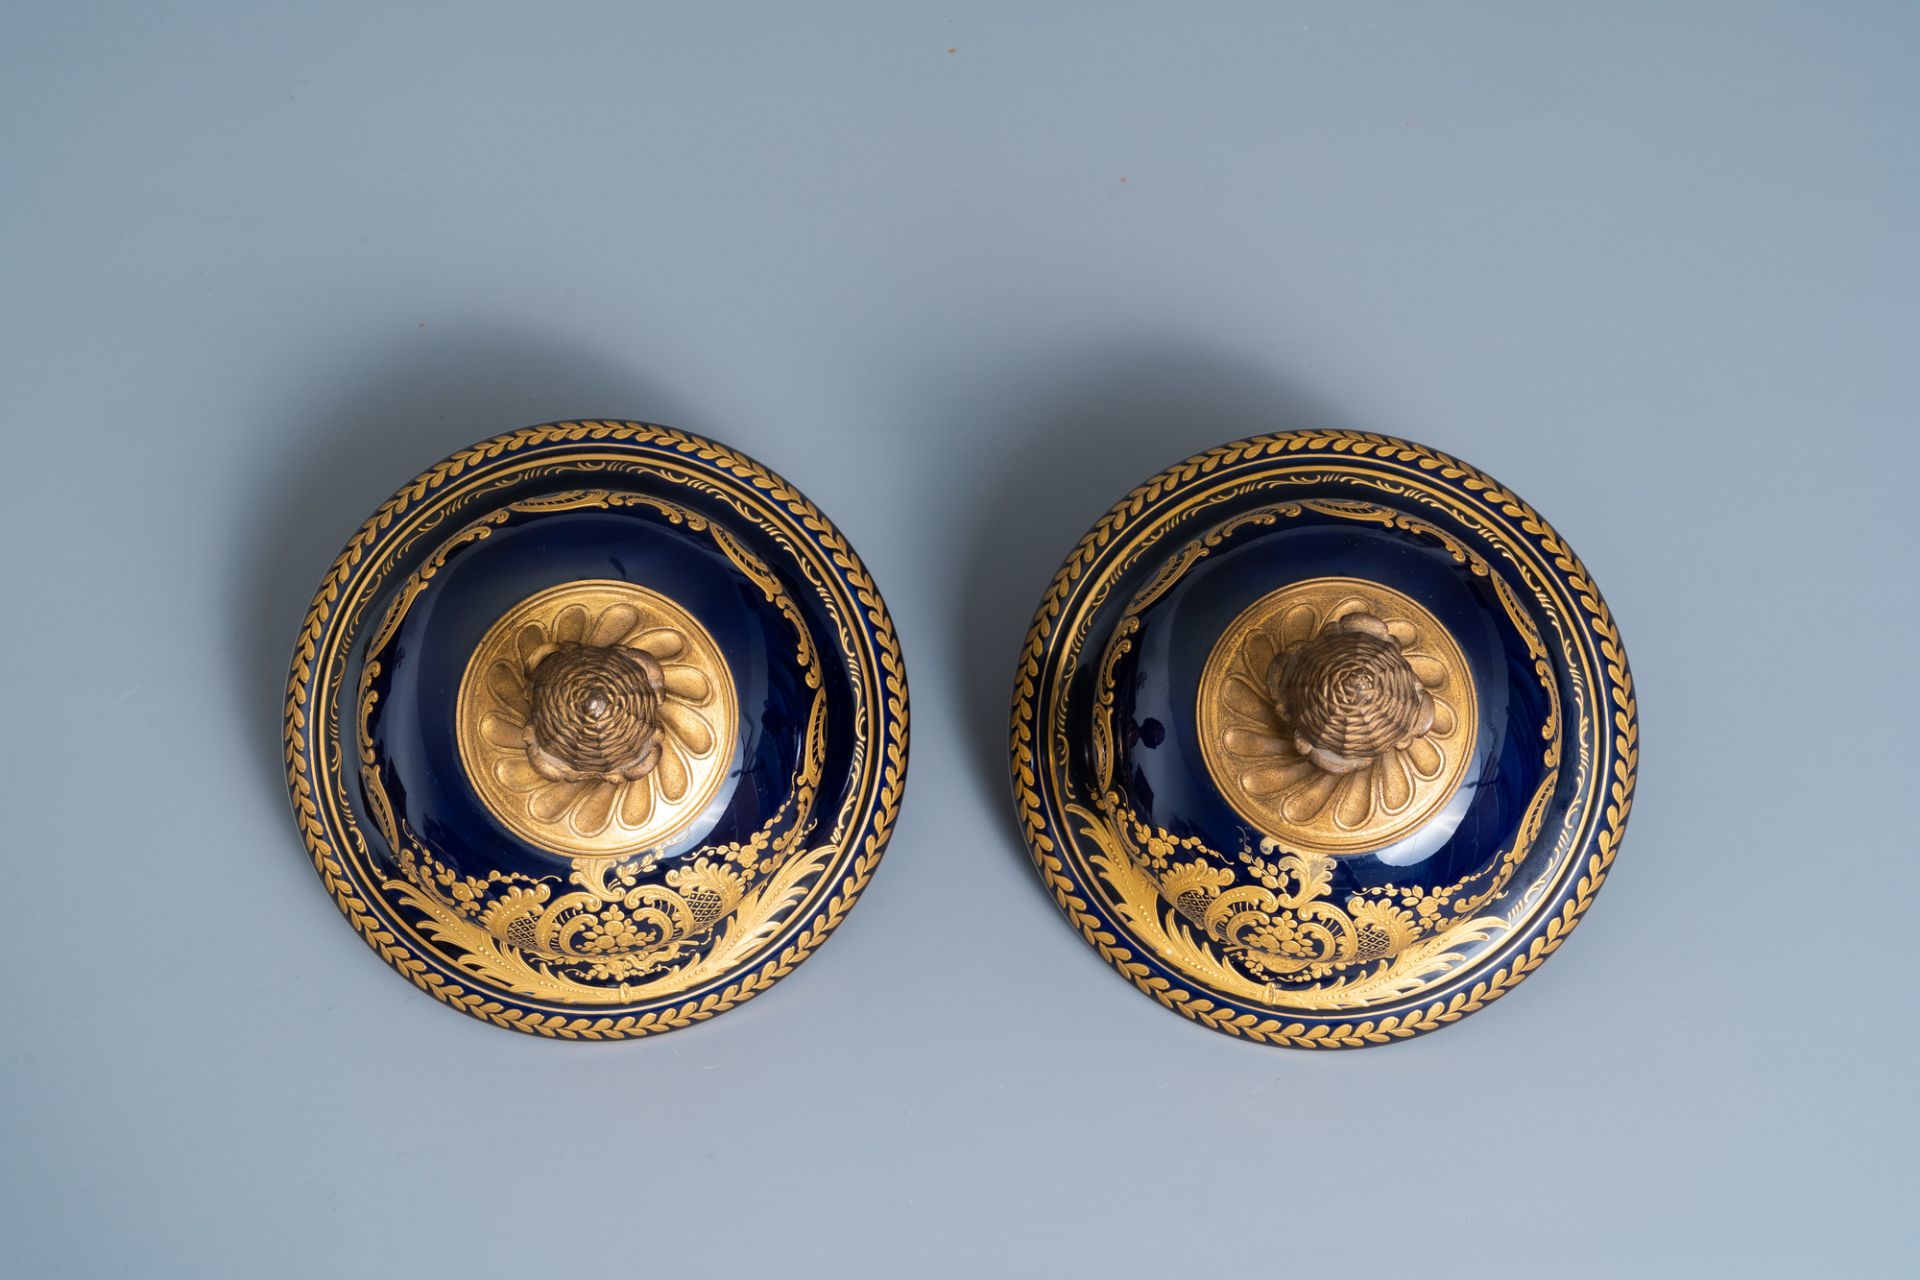 A pair of large French Svres-style vases with gilded bronze mounts, signed Le Berre, 19th C. - Image 7 of 8